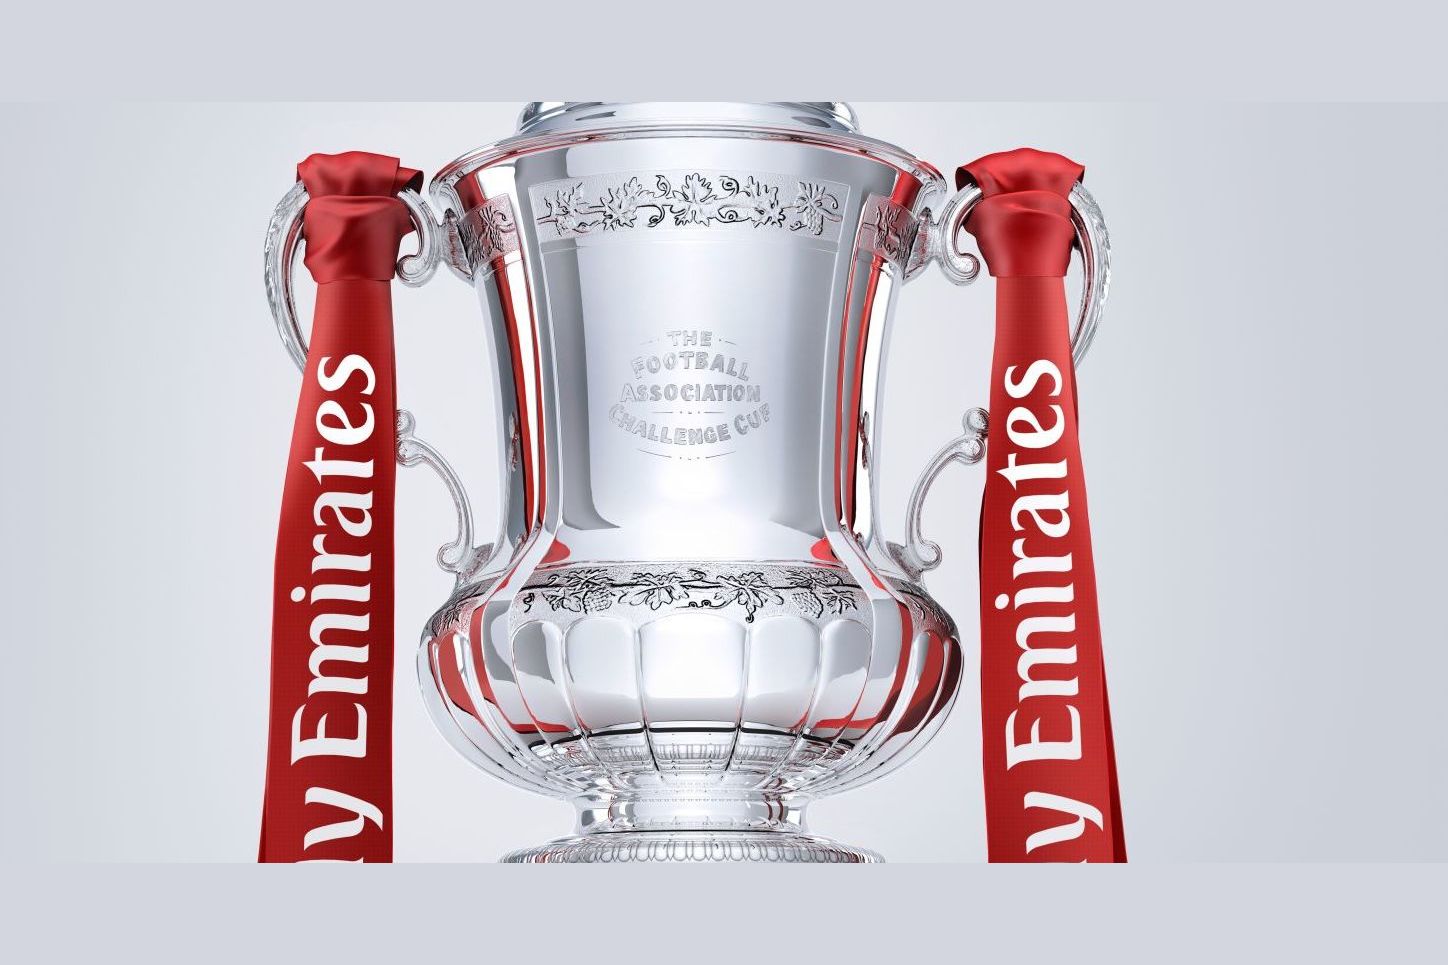 Emirates cup. Кубок Emirates fa Cup. Emirates fa Cup 2022. Кубок Англии. Кубок Англии трофей.